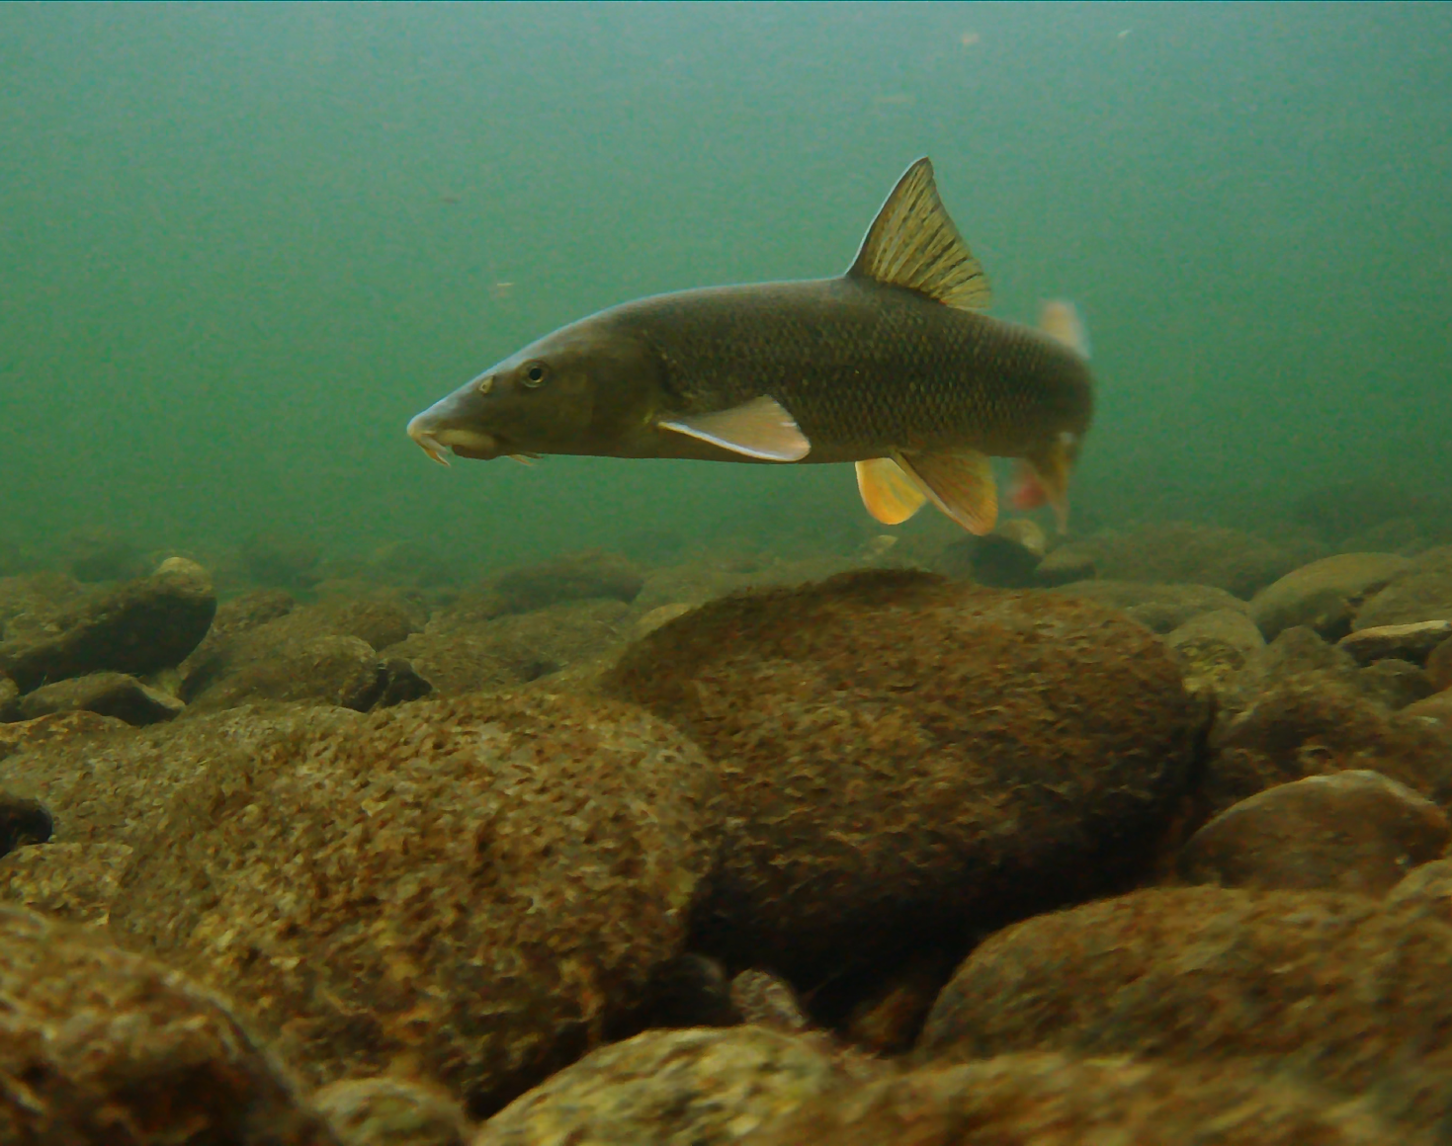 A barb swims underwater in a natural freshwater habitat. The murky greenish water surrounds the fish, which is placed in the centre of the picture, and visible stones at the bottom of the water add to the feeling of depth. The barb is in motion and its fins are clearly visible.